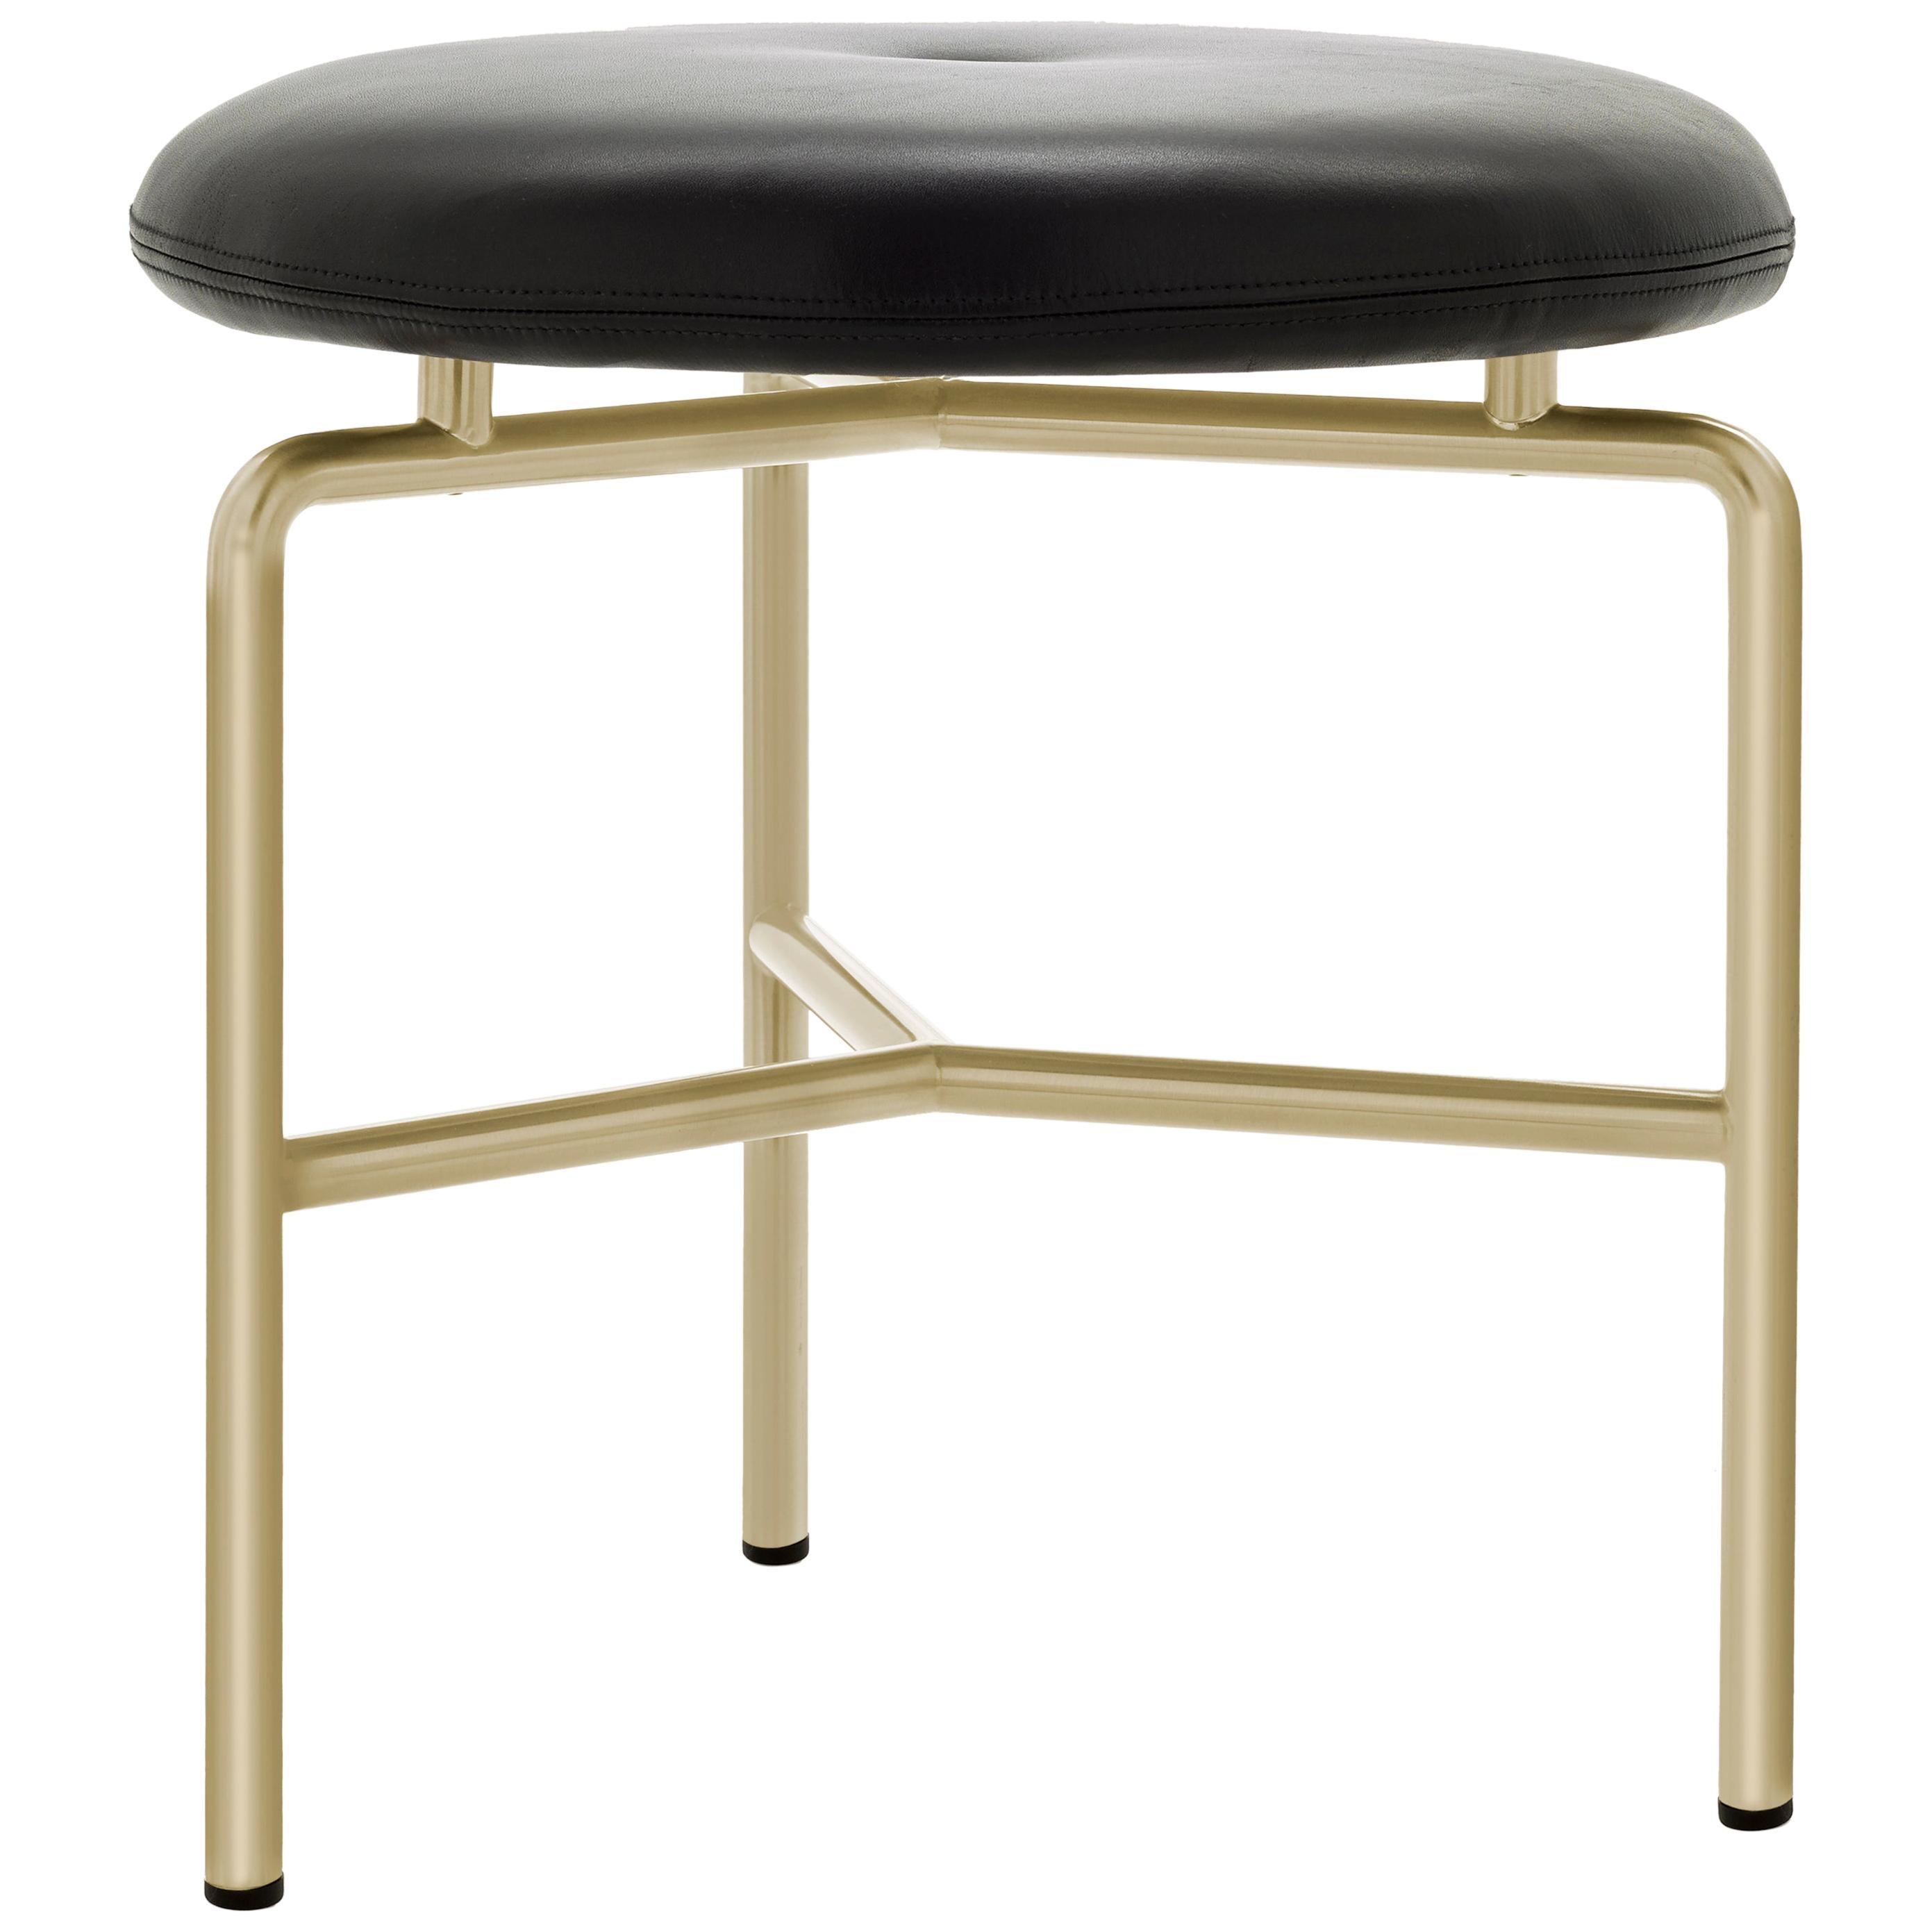 Circular Stool in Satin Brass and Leather Designed by Craig Bassam